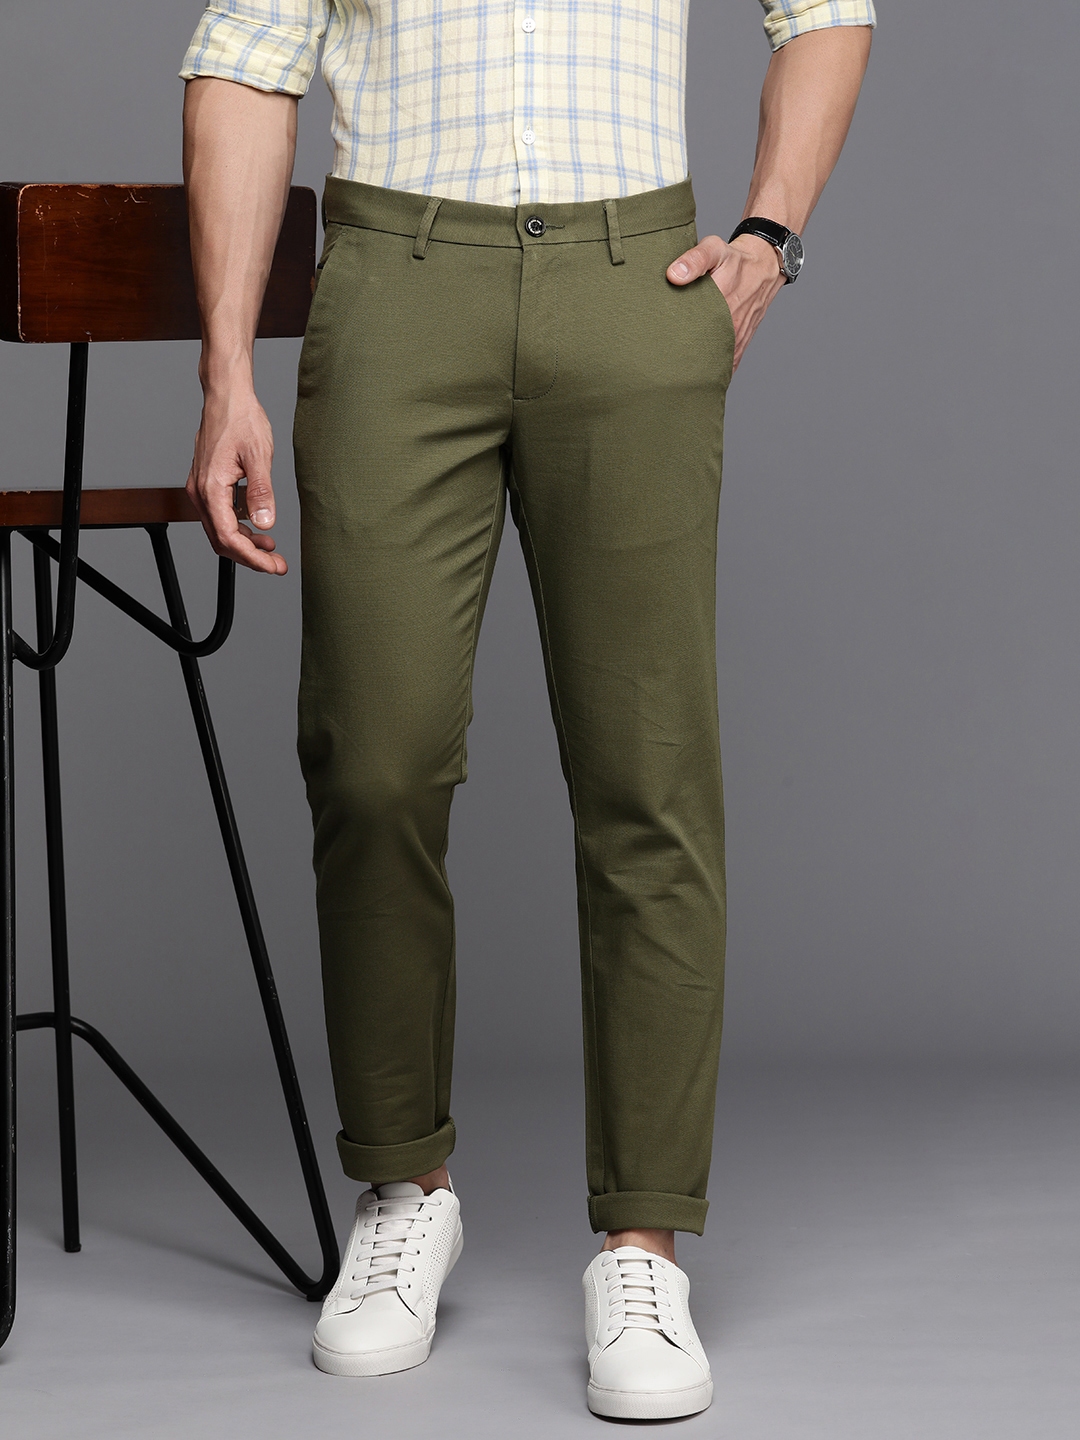 Allen Solly Solid Olive Jogger Pants - Get Best Price from Manufacturers &  Suppliers in India